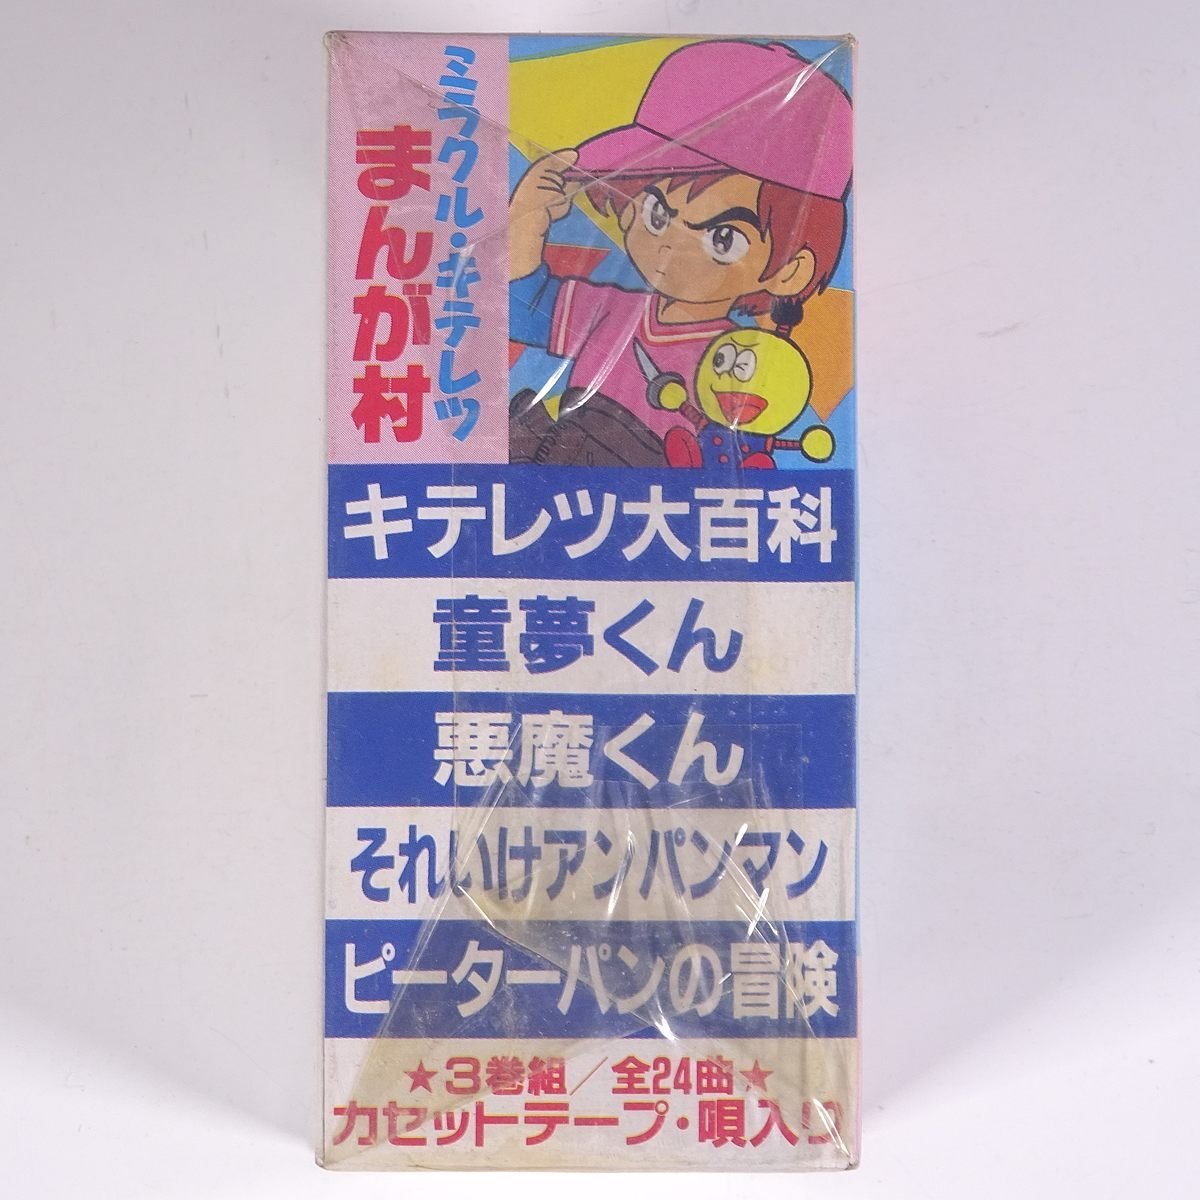 [ unopened goods ] miracle *kiteretsu....3 volume collection all 24 bending TSM-779~781 corporation tone music anime anime song cassette tape . entering 